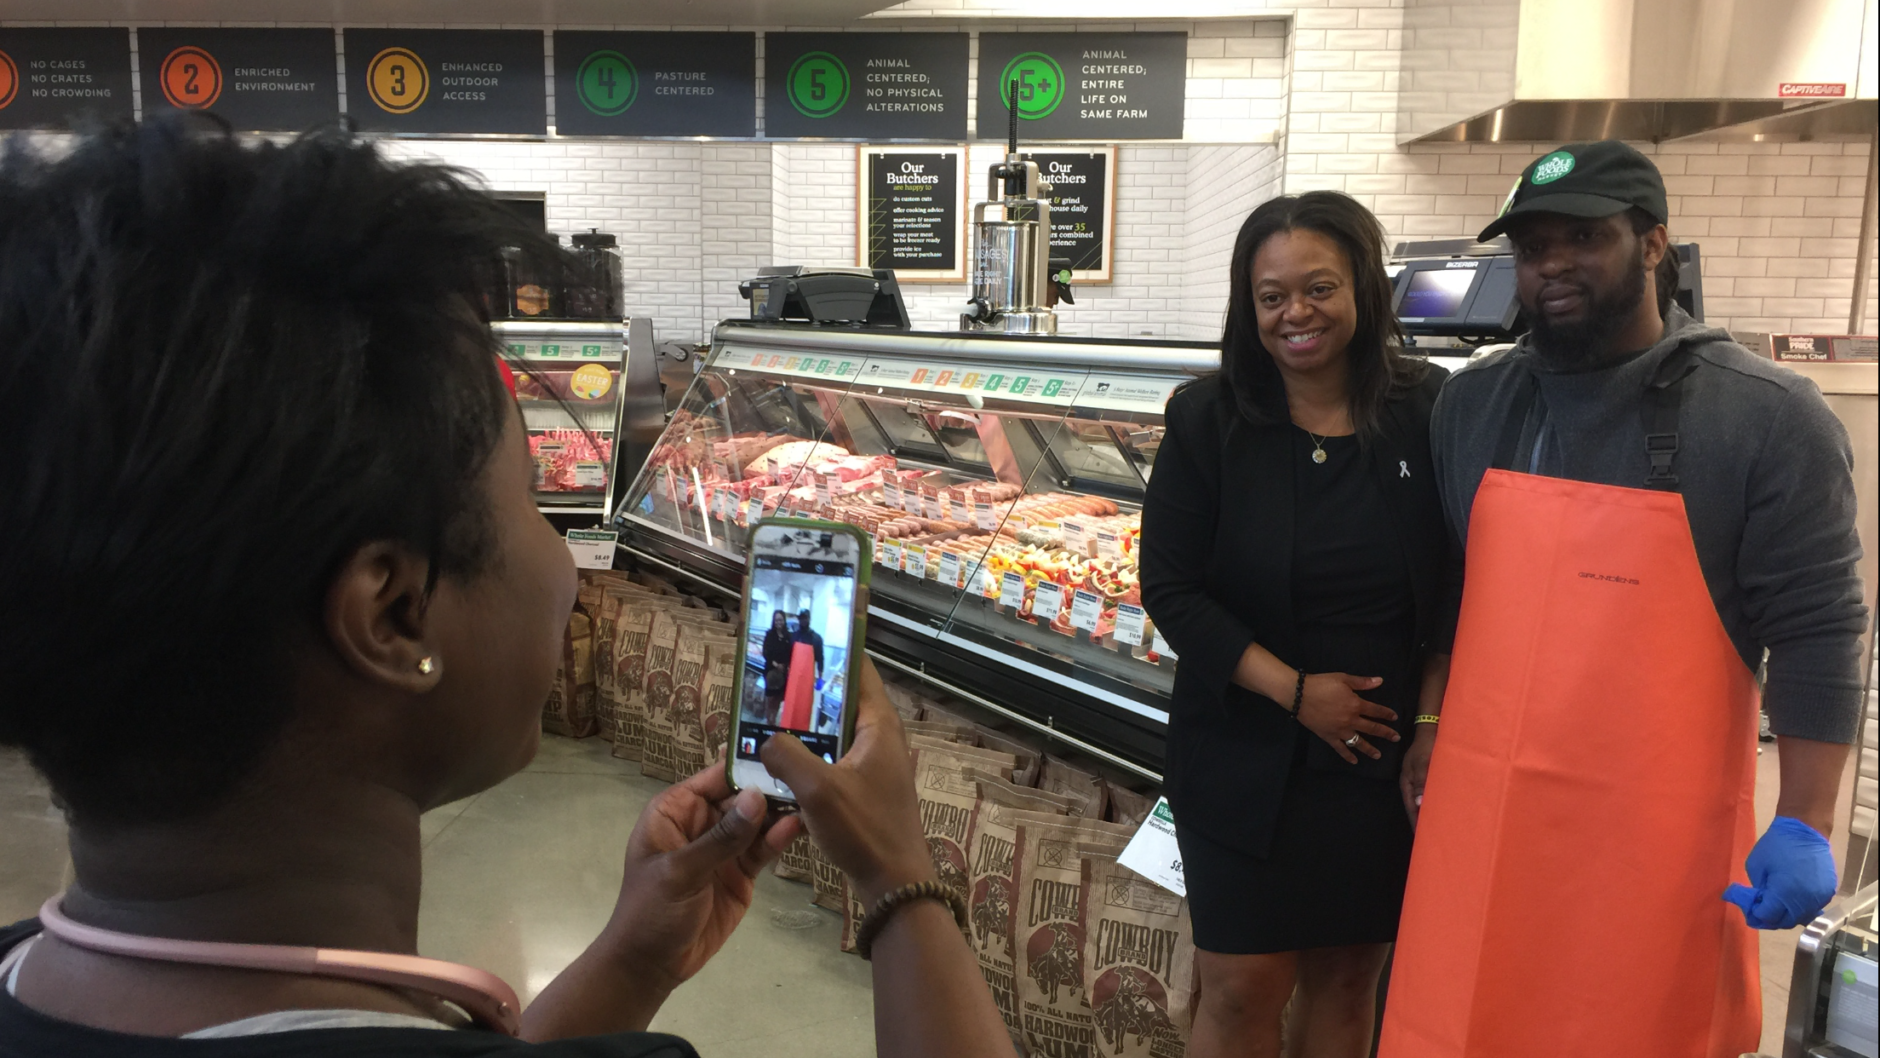 "I am so happy to see this come to fruition," said Prince George's County Councilwoman Karen R. Toles, shown getting her picture taken with Dennis Williams, of Capitol Heights. "This is the type of project and amenities we like to see in our beautiful Prince George's County." (WTOP/Kristi King)